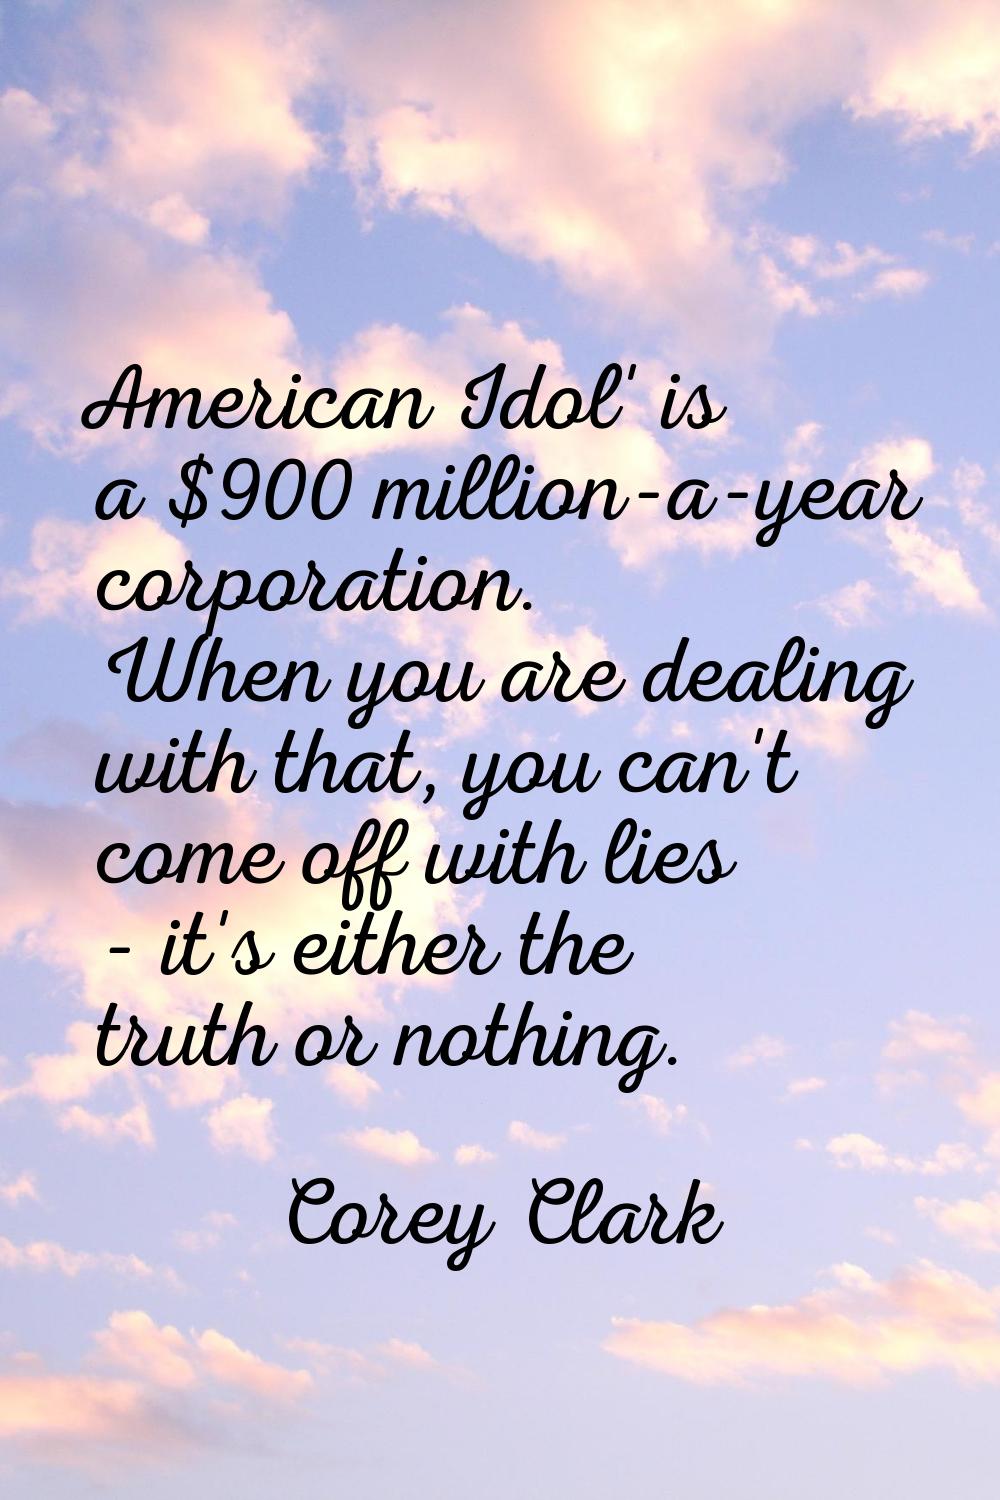 American Idol' is a $900 million-a-year corporation. When you are dealing with that, you can't come